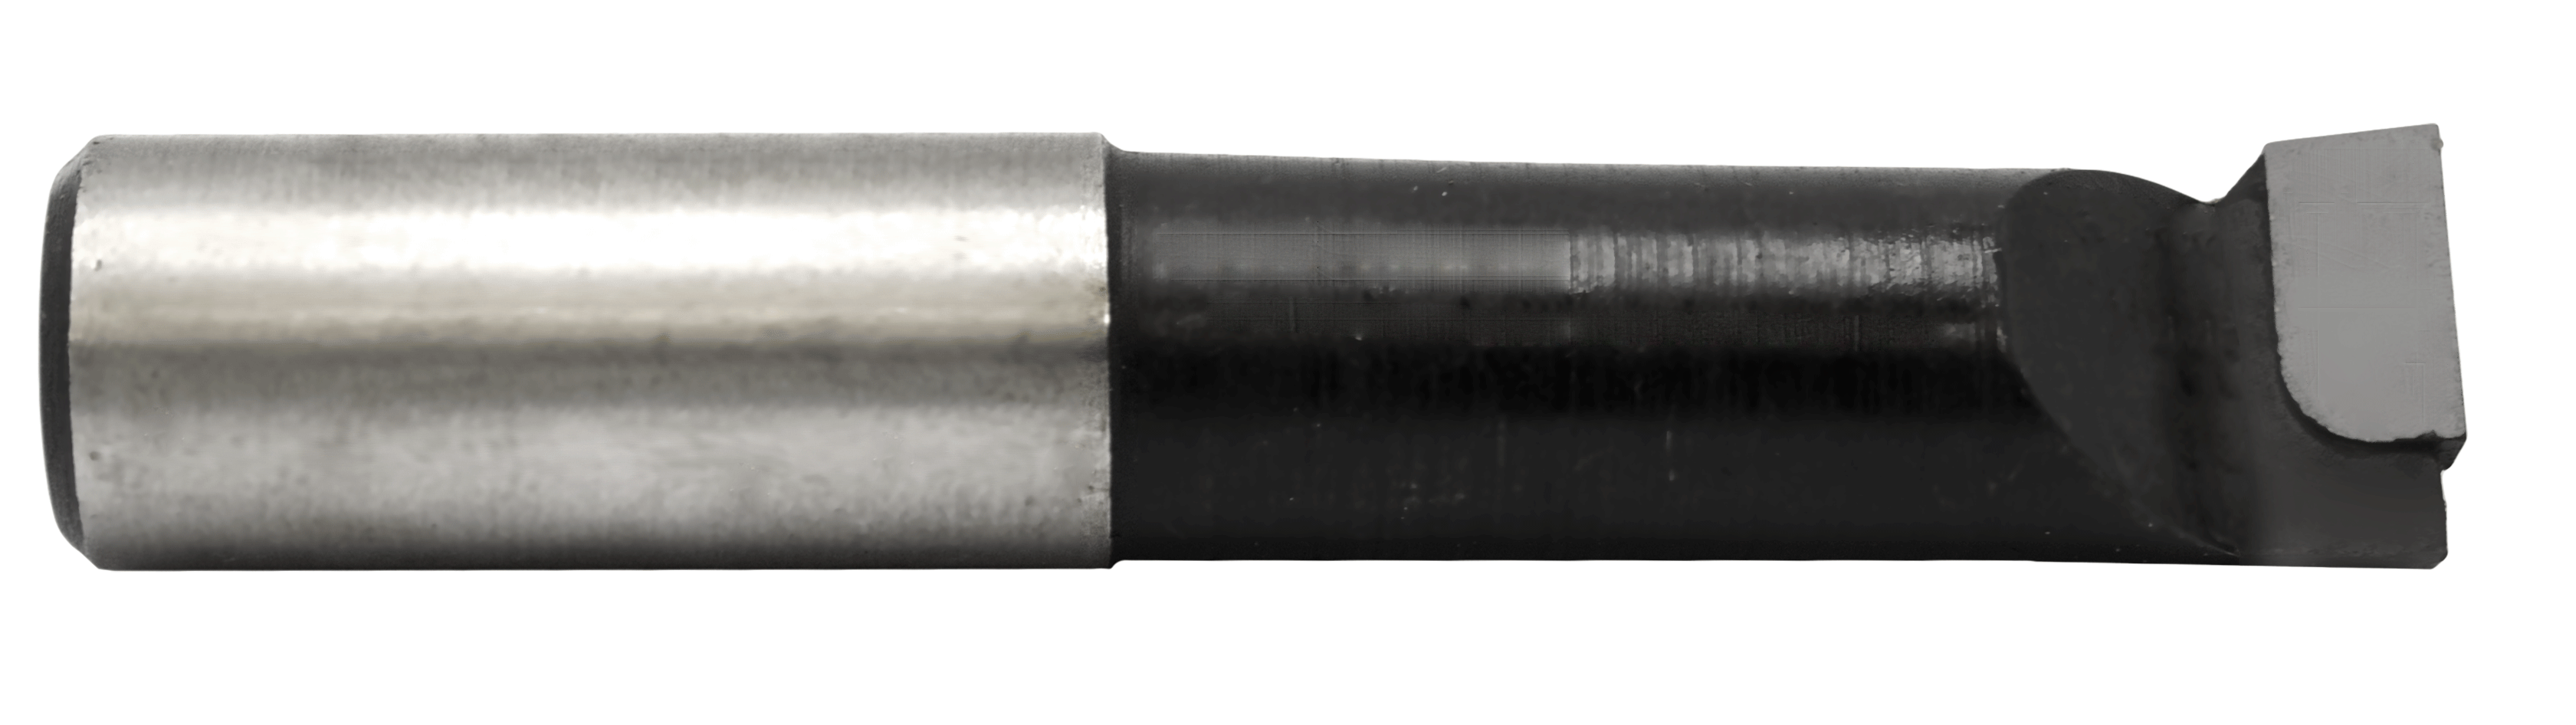 Super-Bore 10mm" C-6 for Steel Applications